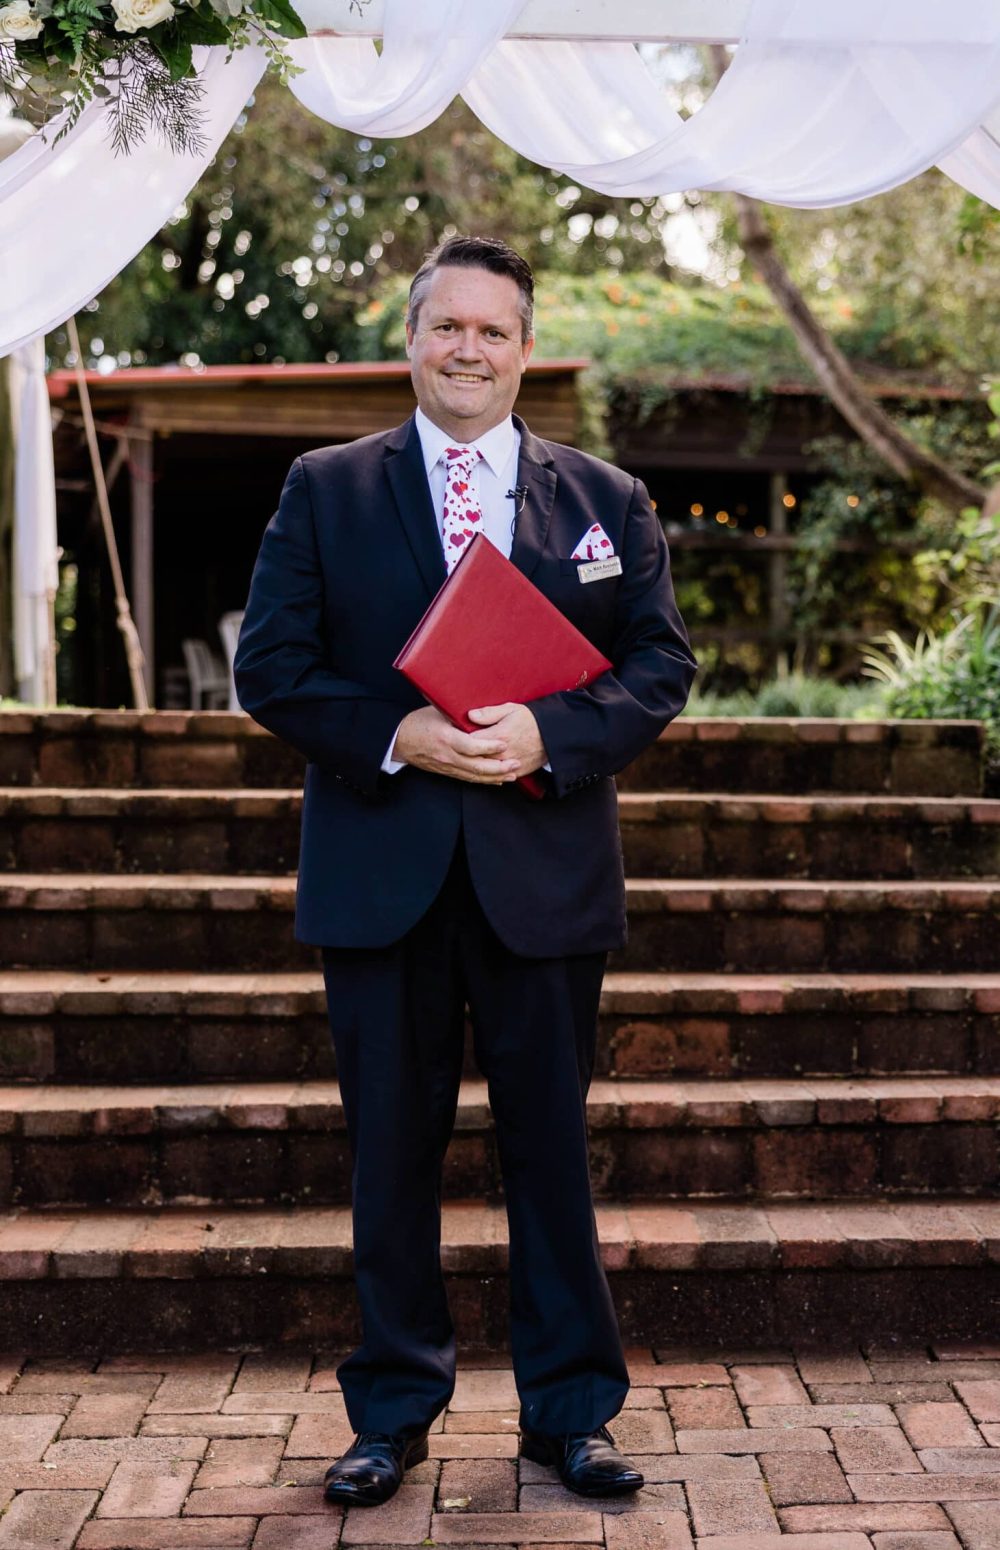 Mark Reynolds Celebrant in a black suit standing on the steps of one of the ceremony areas at the Secret Garden Wedding Venue on Mt Tamborine.